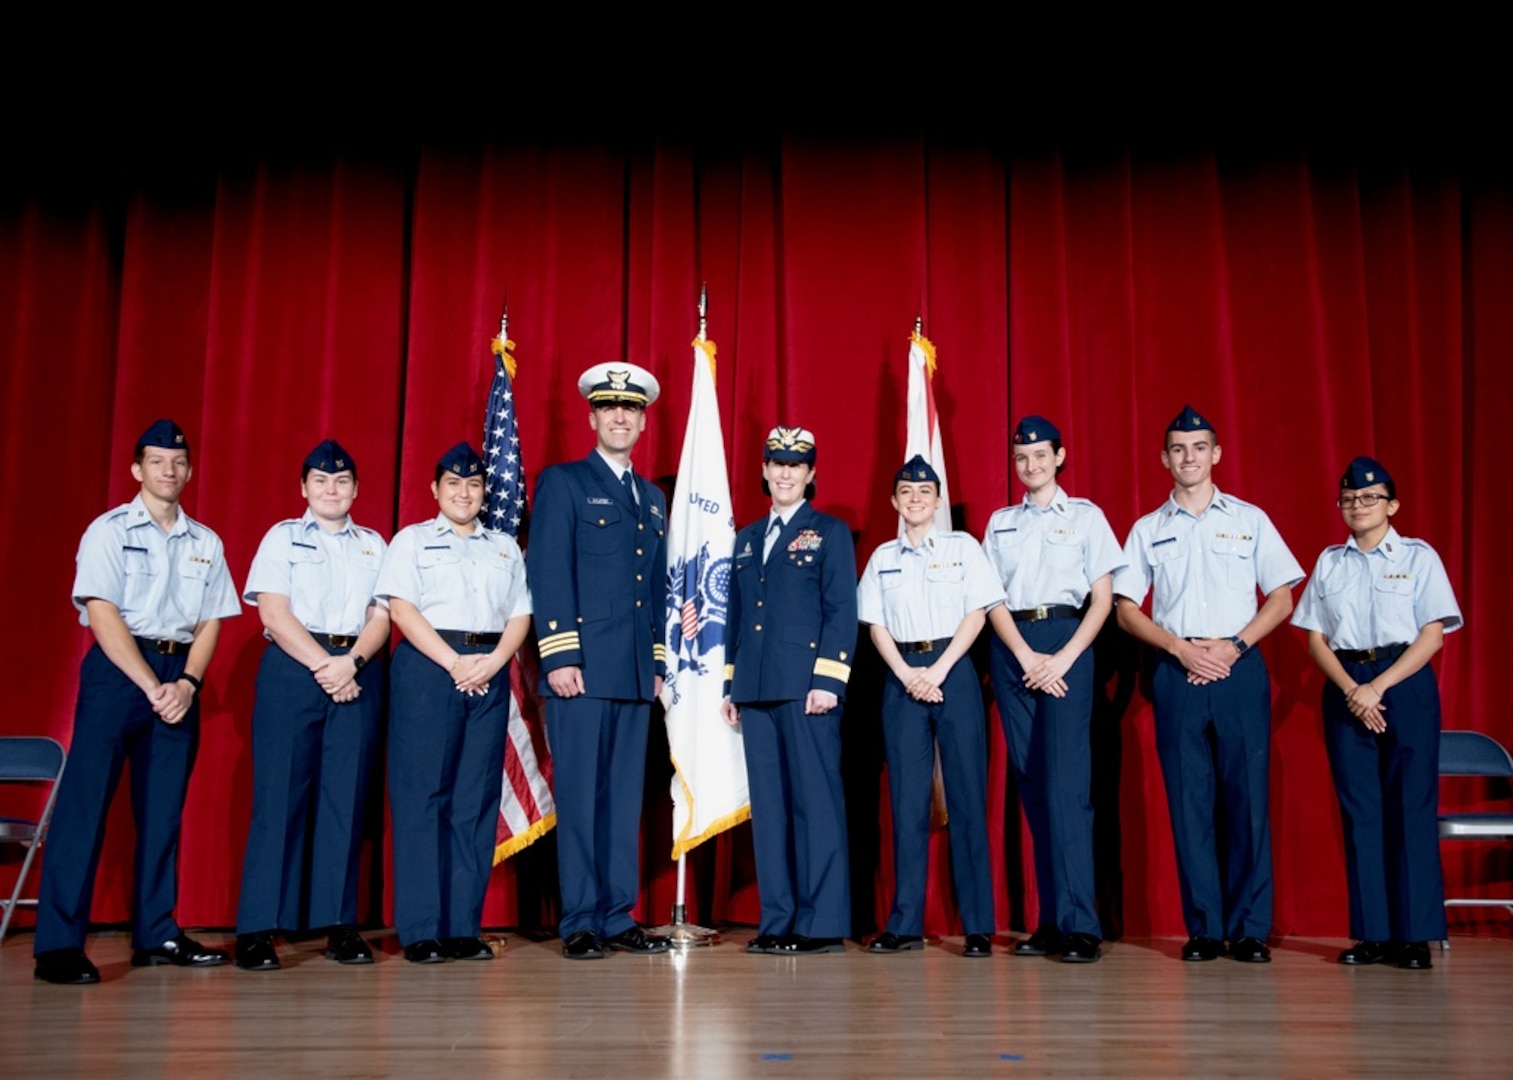 Coast Guard Rear Adm. Megan Dean, Cmdr. Clay Cromer, and high school student cadet leaders conduct the ceremony for the establishment of the Coast Guard Junior Reserve Officers' Training Corps (JROTC) unit at Pinellas Park High School in Largo, Florida, Nov. 12, 2021. The unit is the fourth and largest Coast Guard JROTC established, and the second unit established under recently-expanded federal law. U.S. Coast Guard photo by Petty Officer 1st Class Ayla Hudson.